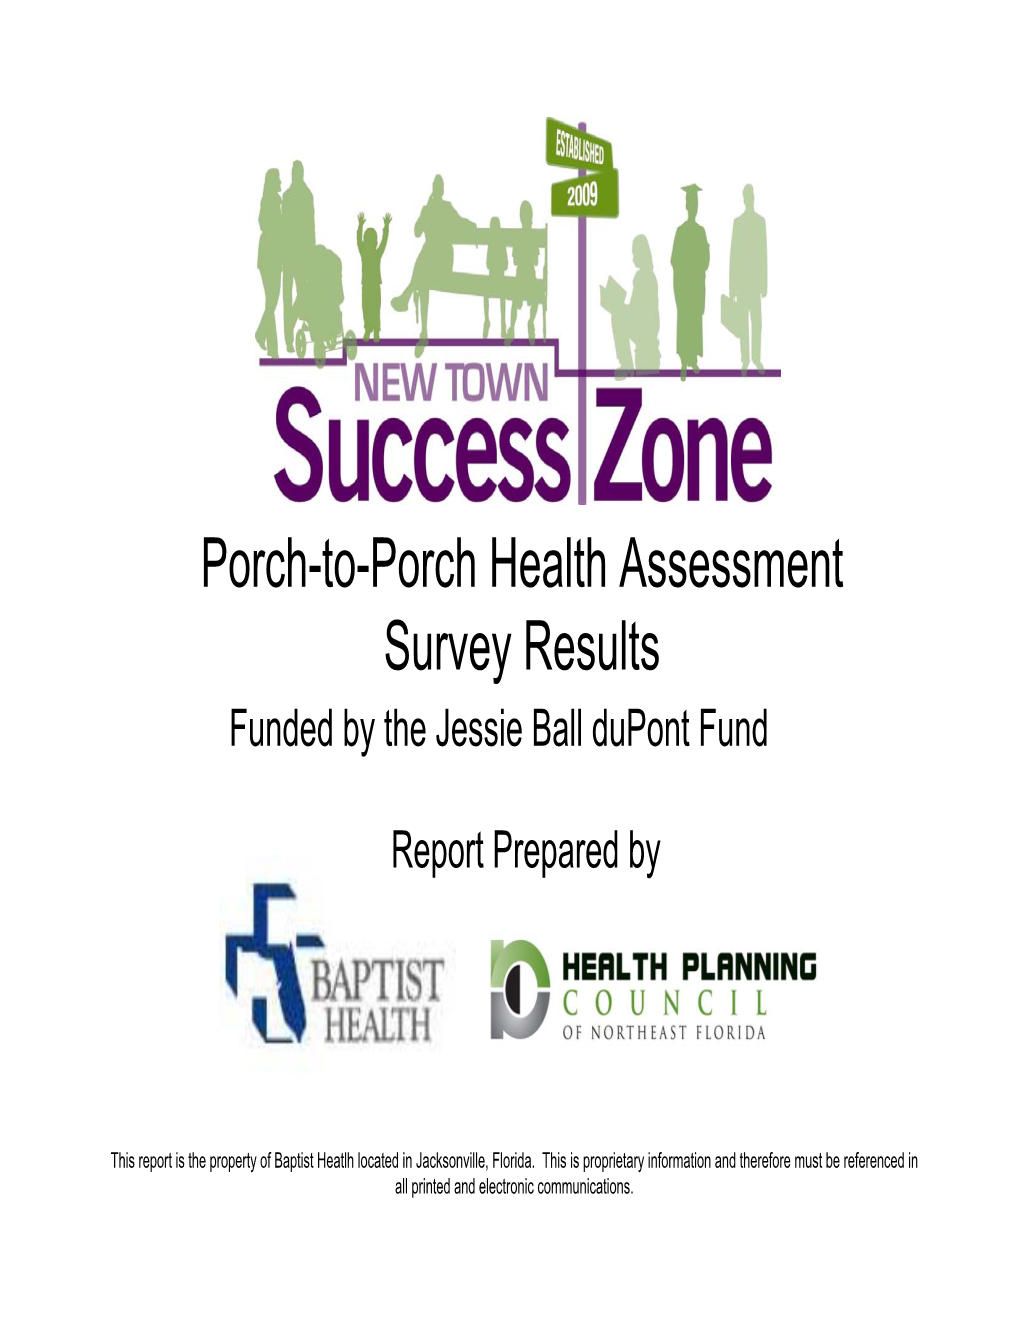 Porch-To-Porch Health Assessment Survey Results Funded by the Jessie Ball Dupont Fund